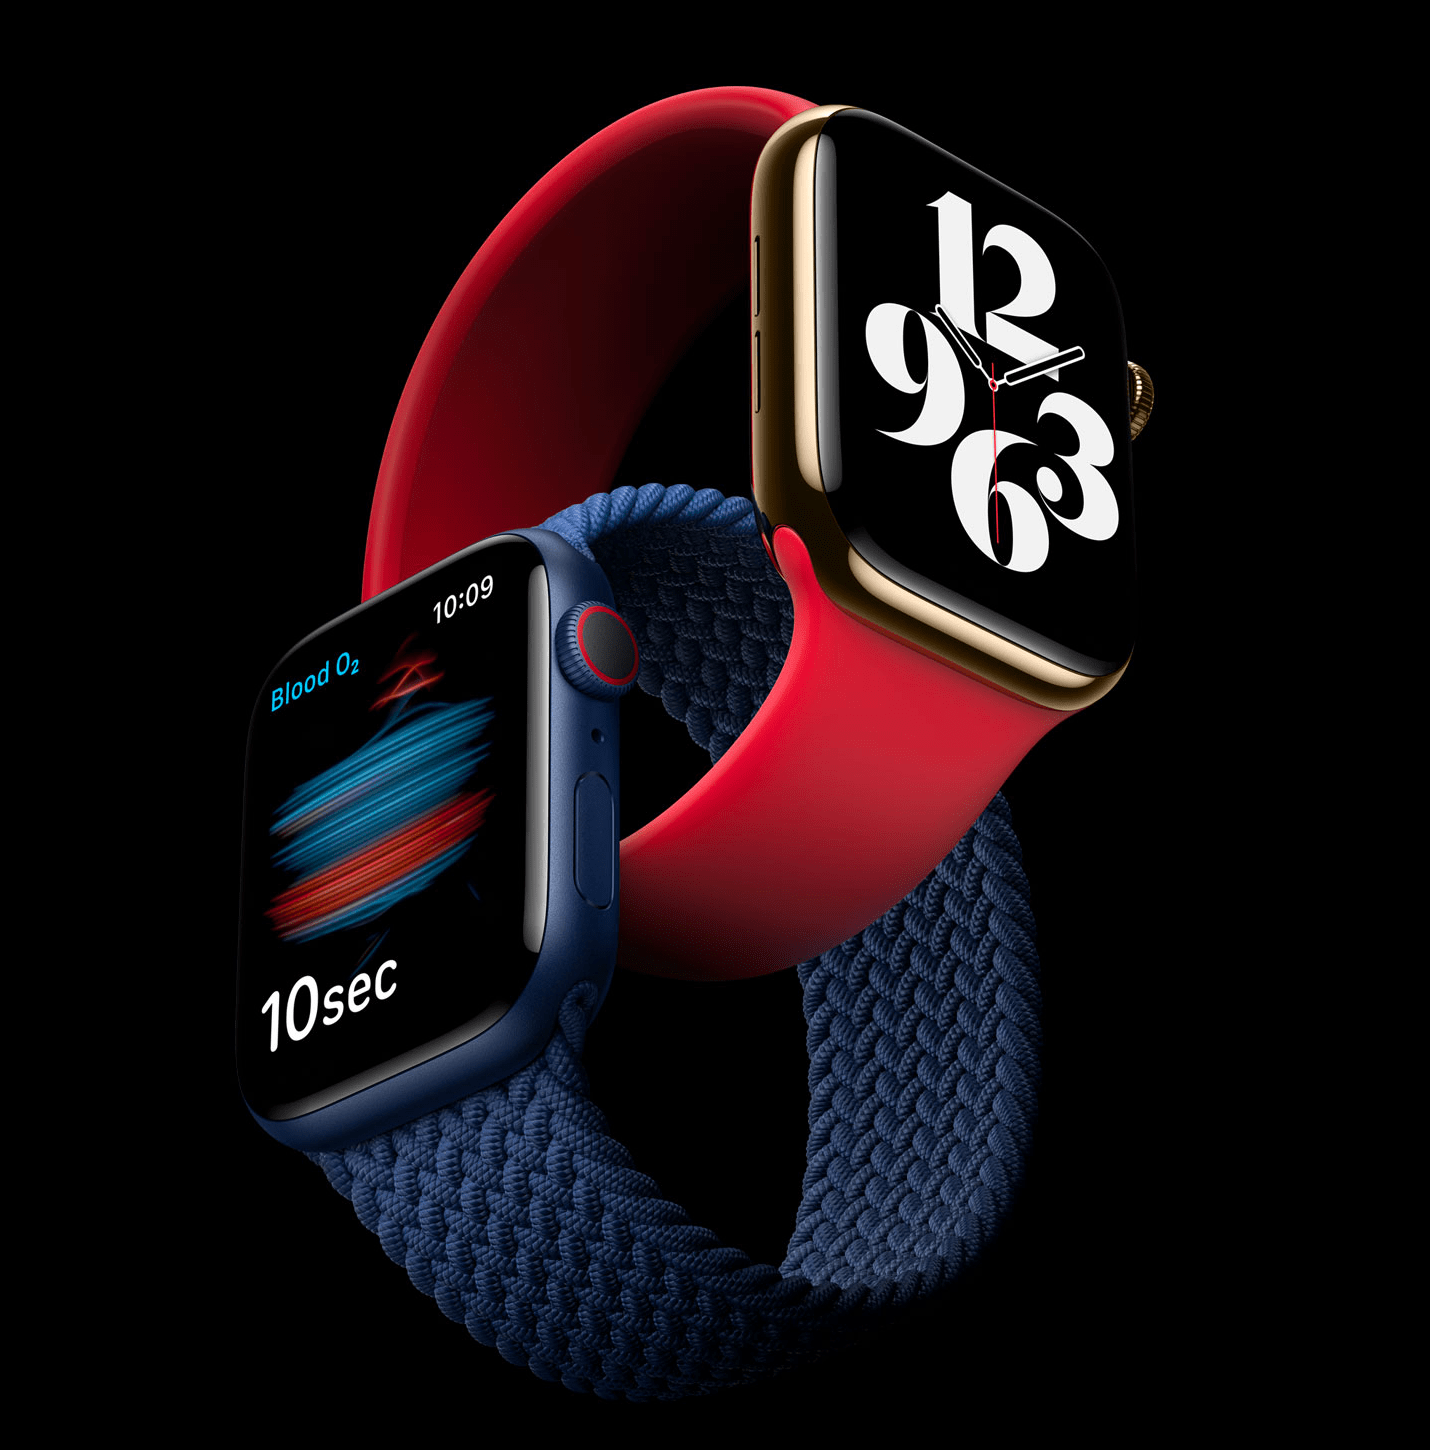 Apple Watch Series 6 technical specifications: size, battery